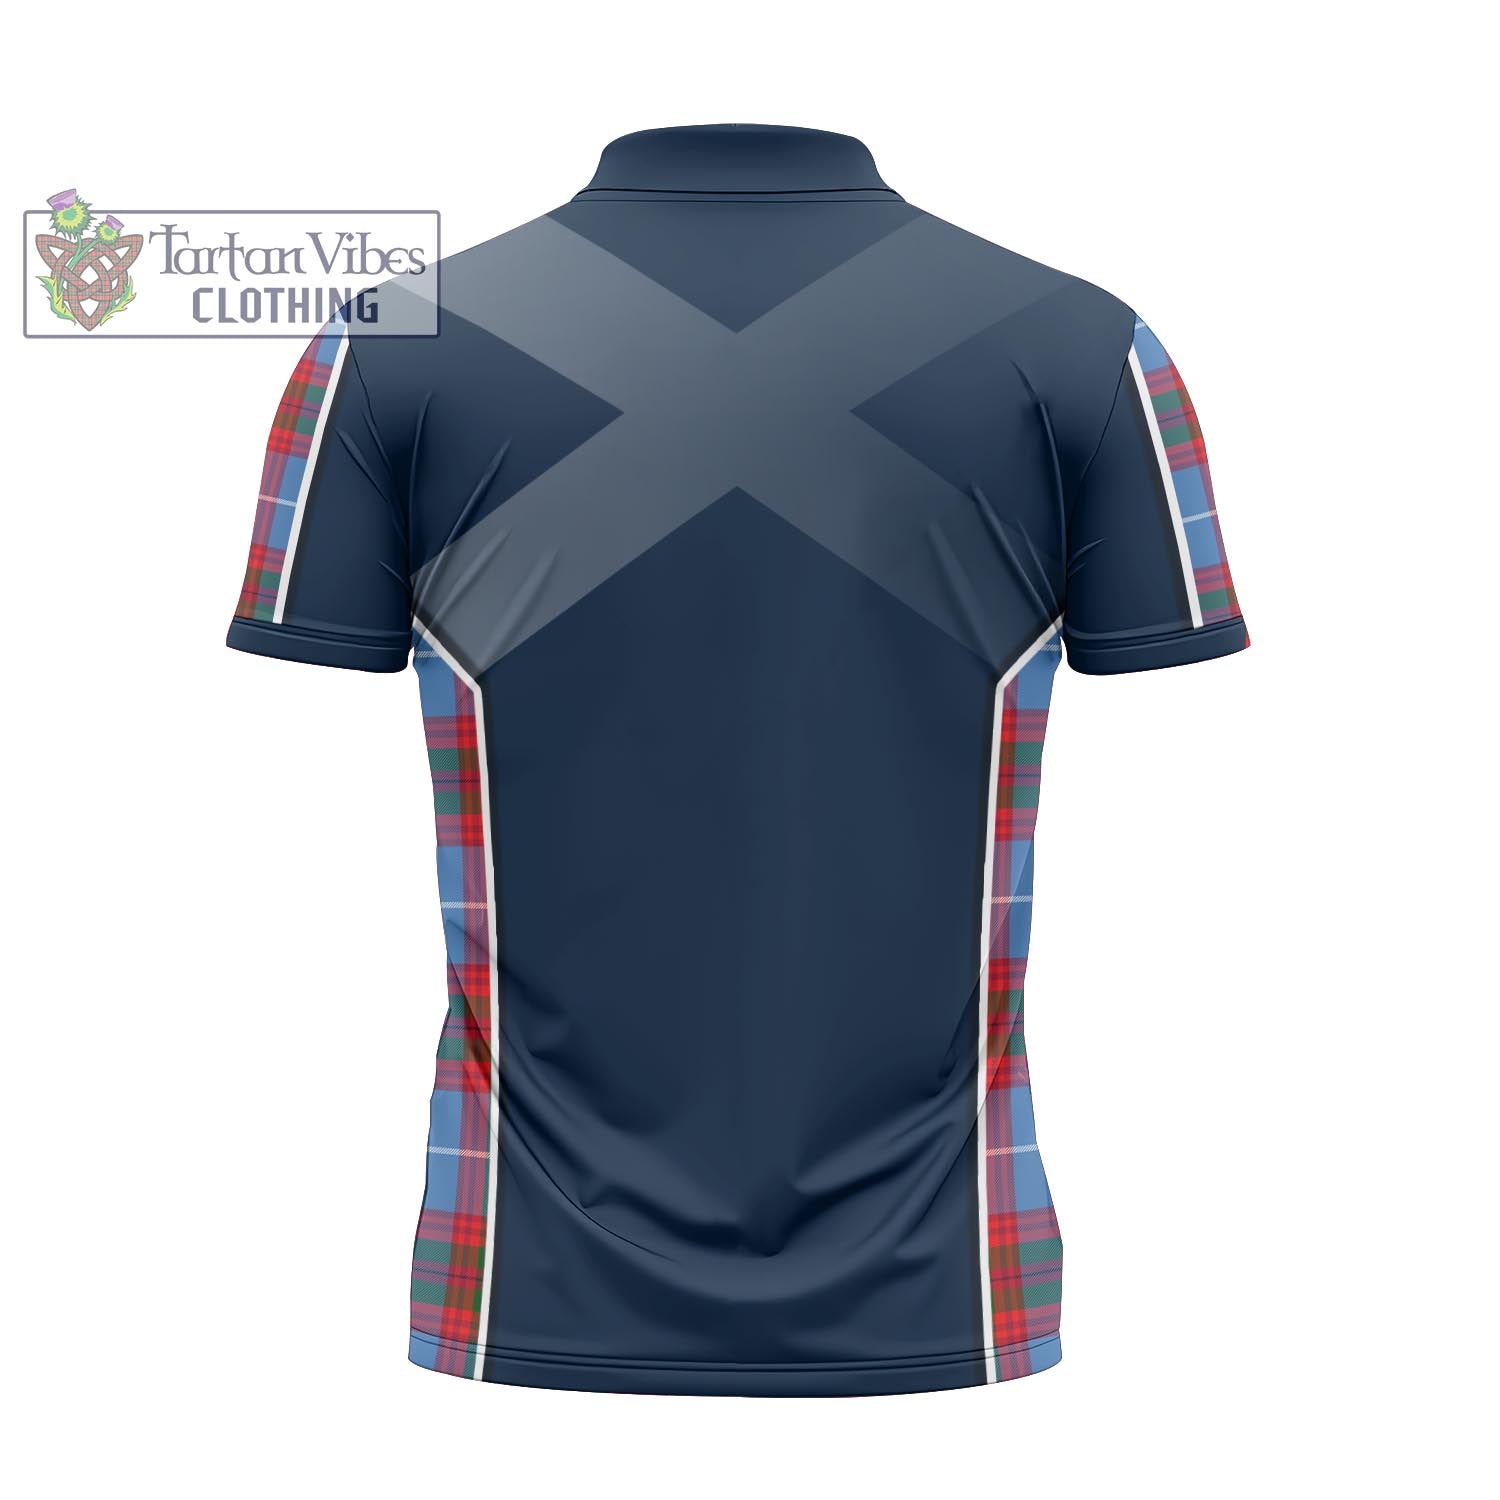 Tartan Vibes Clothing Spalding Tartan Zipper Polo Shirt with Family Crest and Scottish Thistle Vibes Sport Style